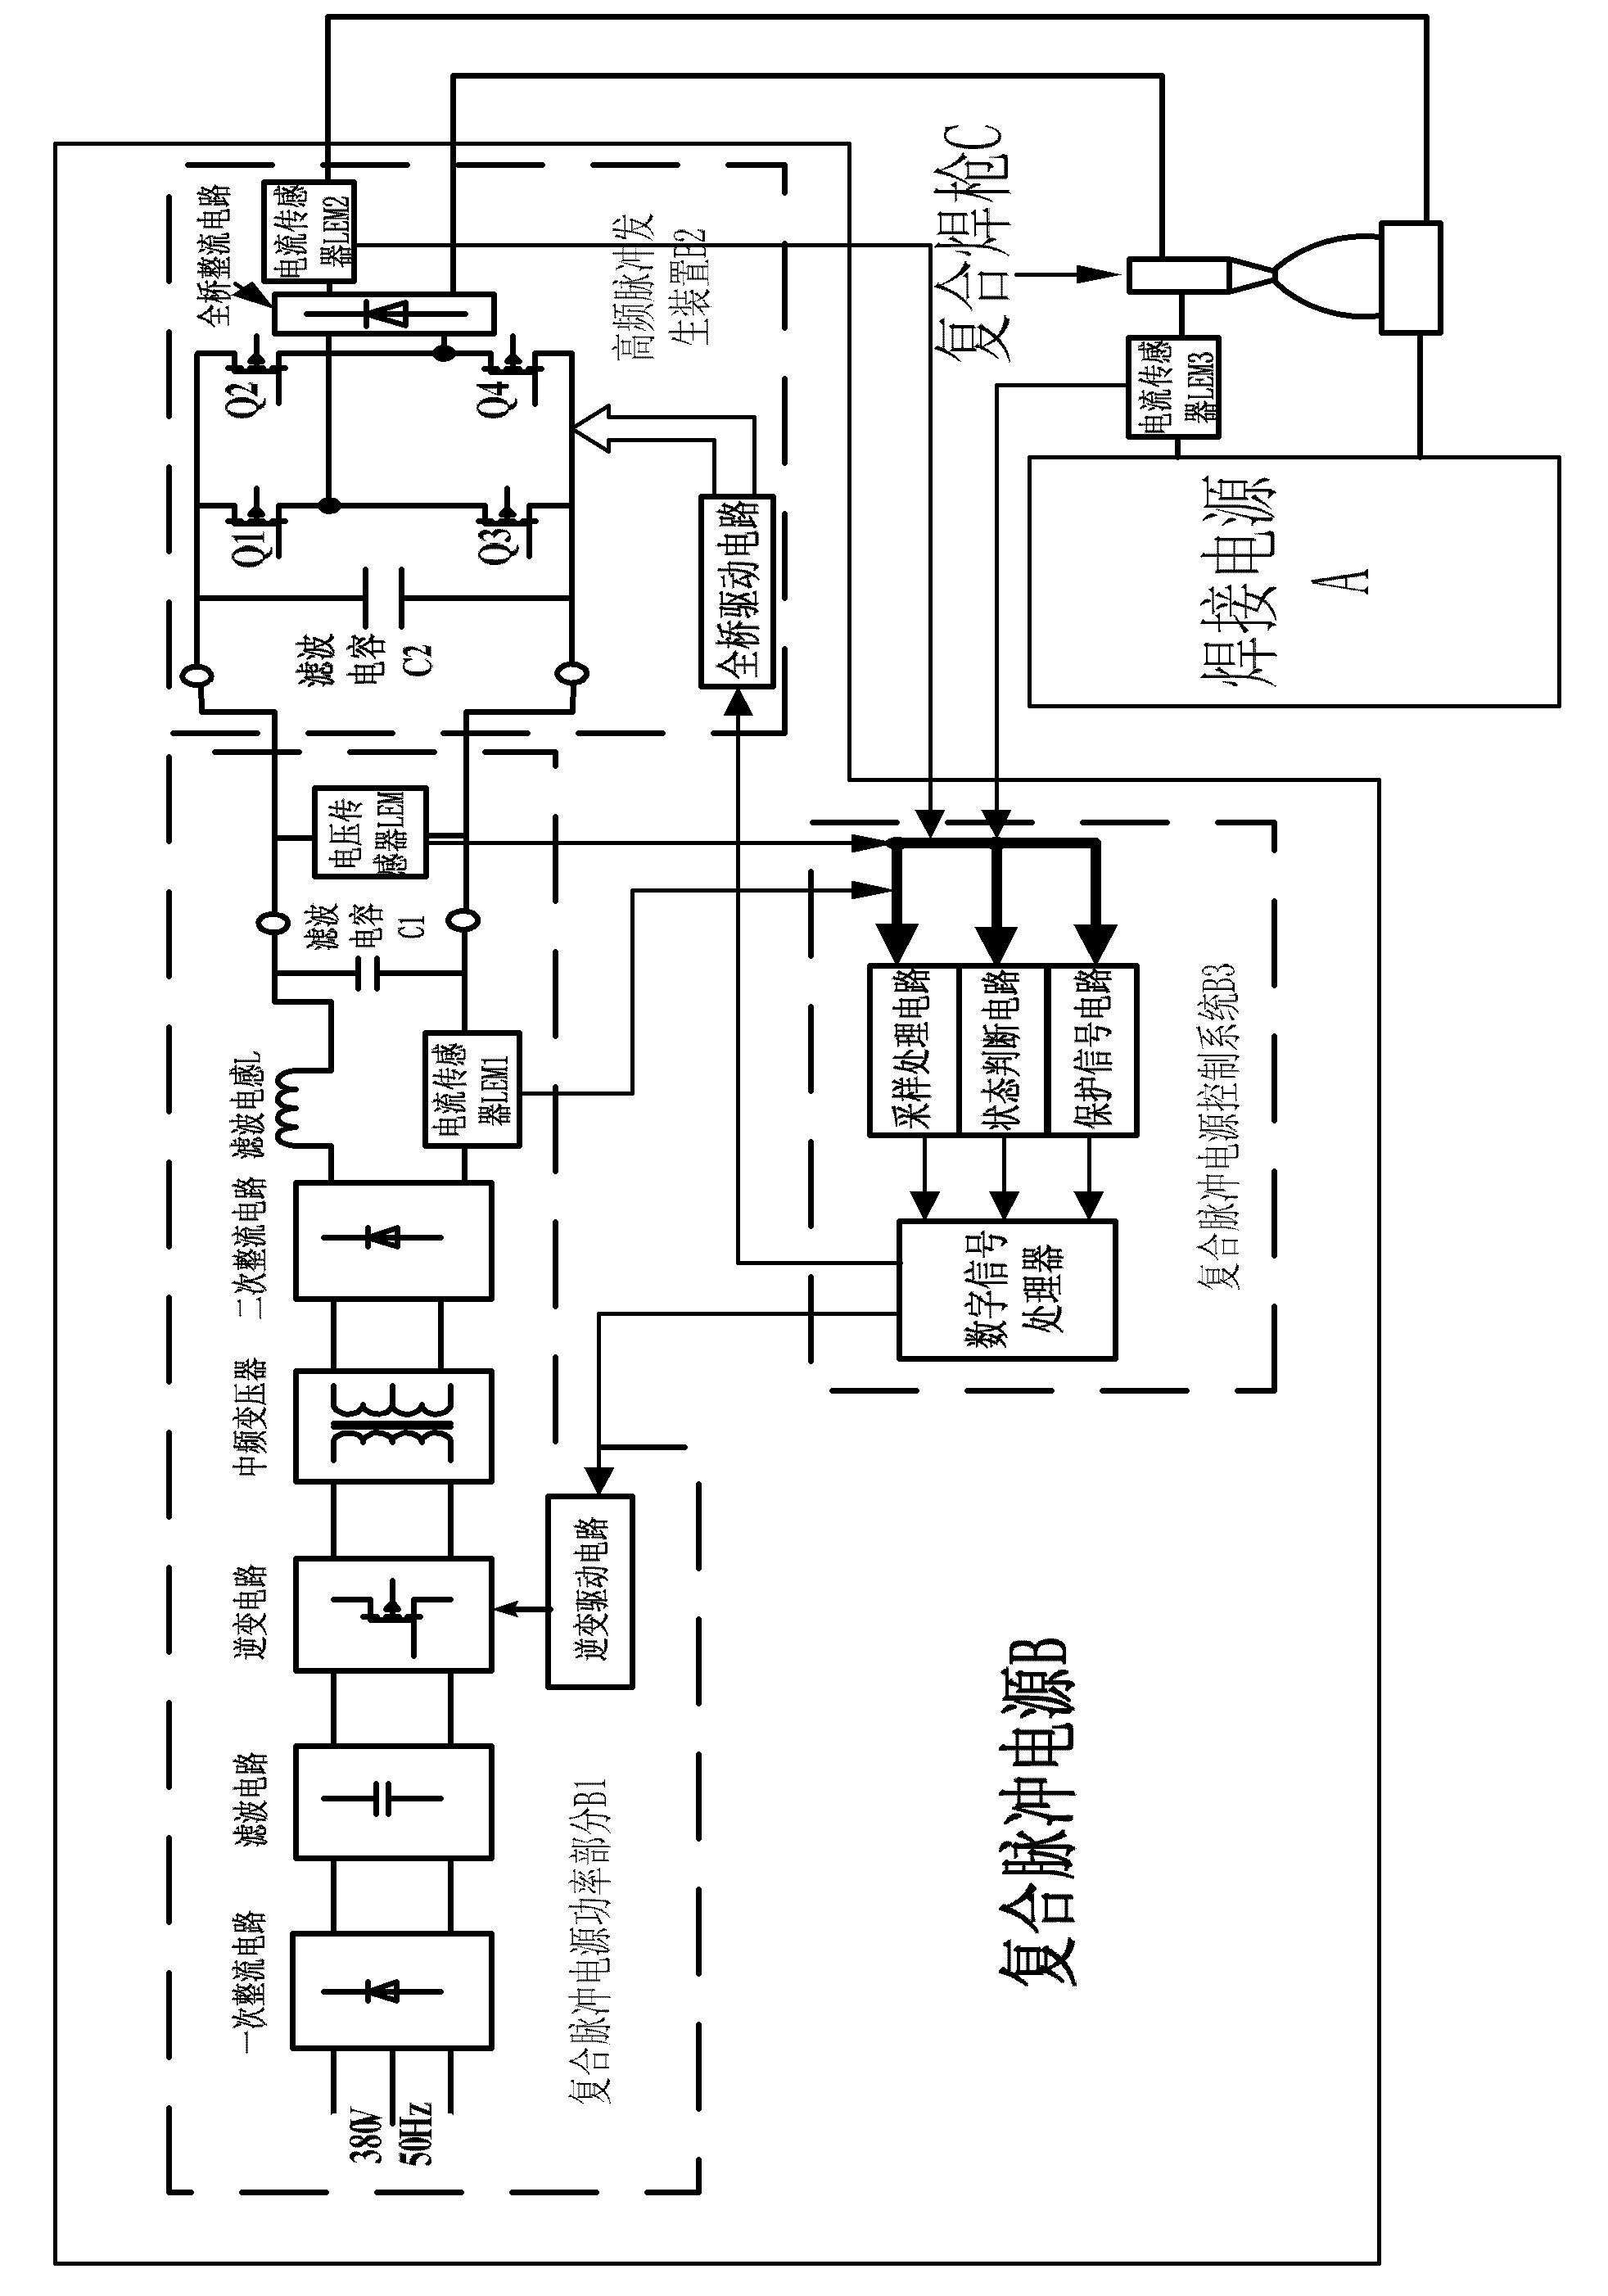 Composite high-frequency pulse welding system and process